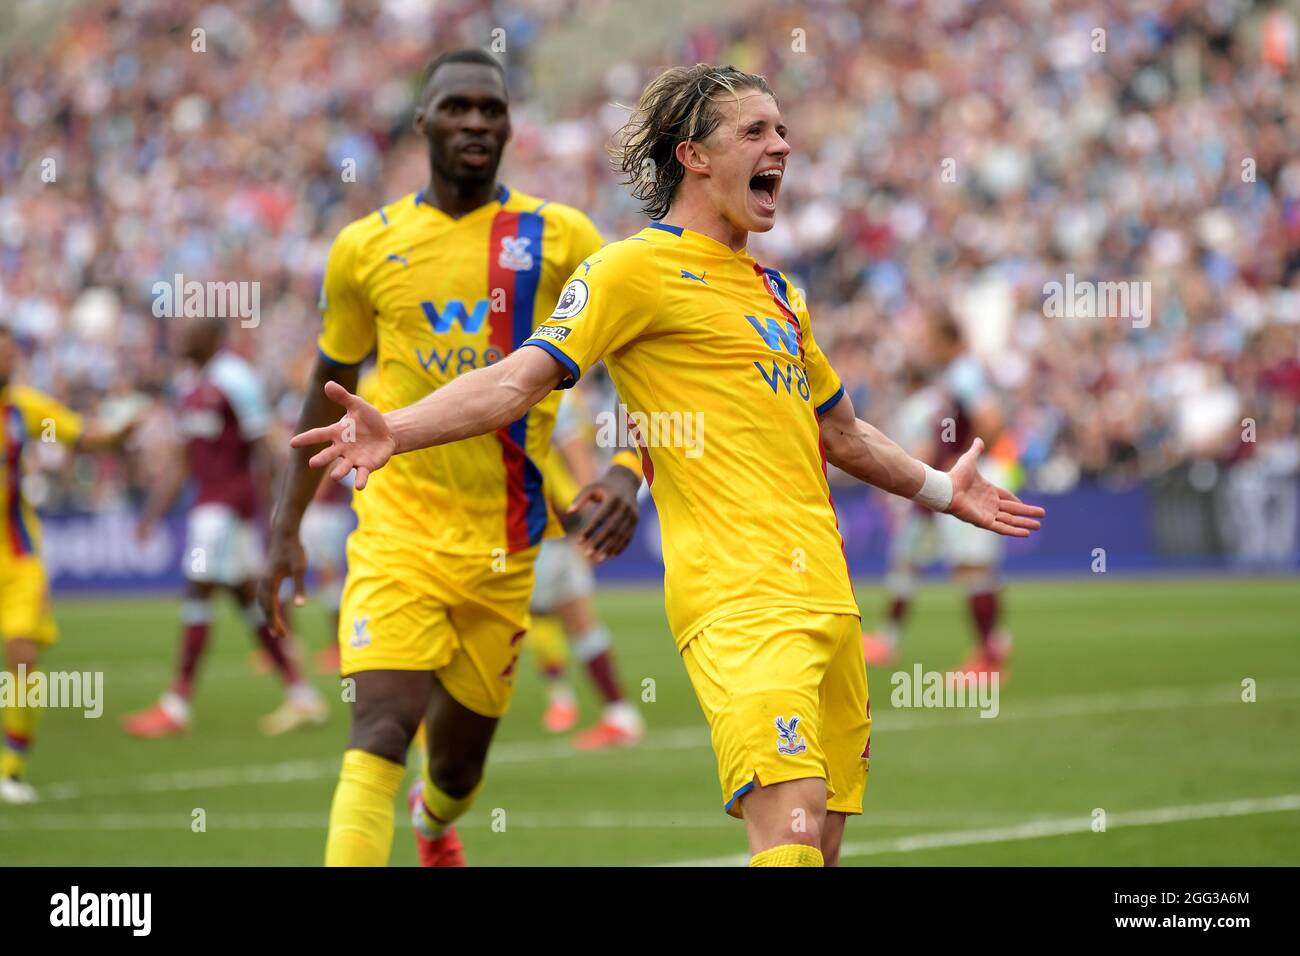 London, UK. 28th Aug, 2021. GOAL Conor Gallagher of Crystal Palace scores his second goal during the West Ham vs Crystal Palace Premier League match at the London Stadium Stratford. Credit: MARTIN DALTON/Alamy Live News Stock Photo